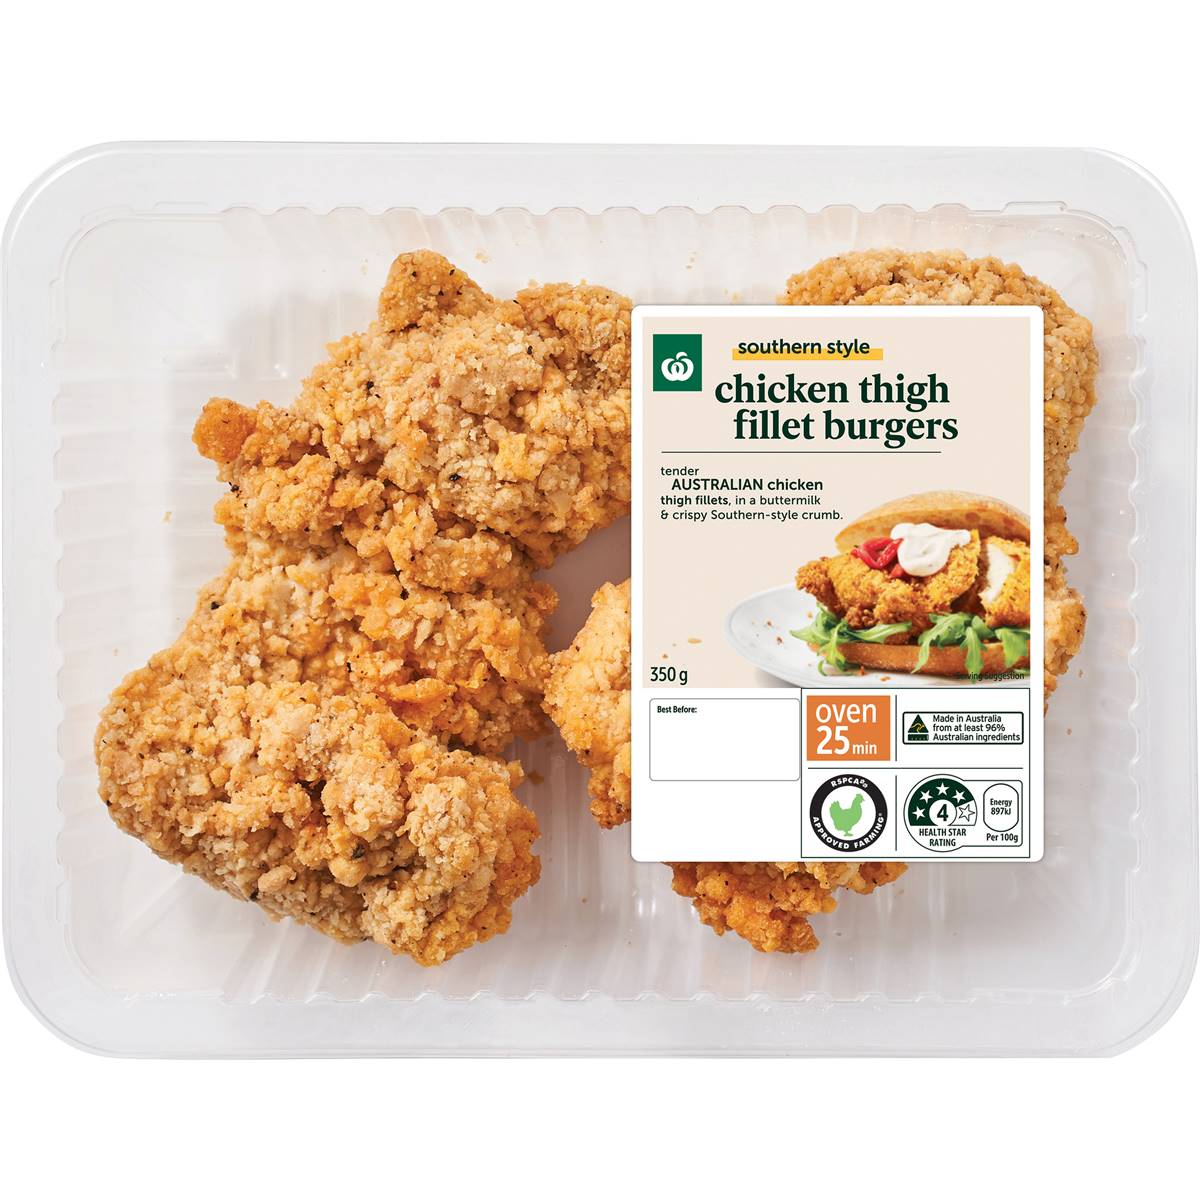 Calories in Woolworths Southern Style Buttermilk Chicken Thigh Fillet Burgers